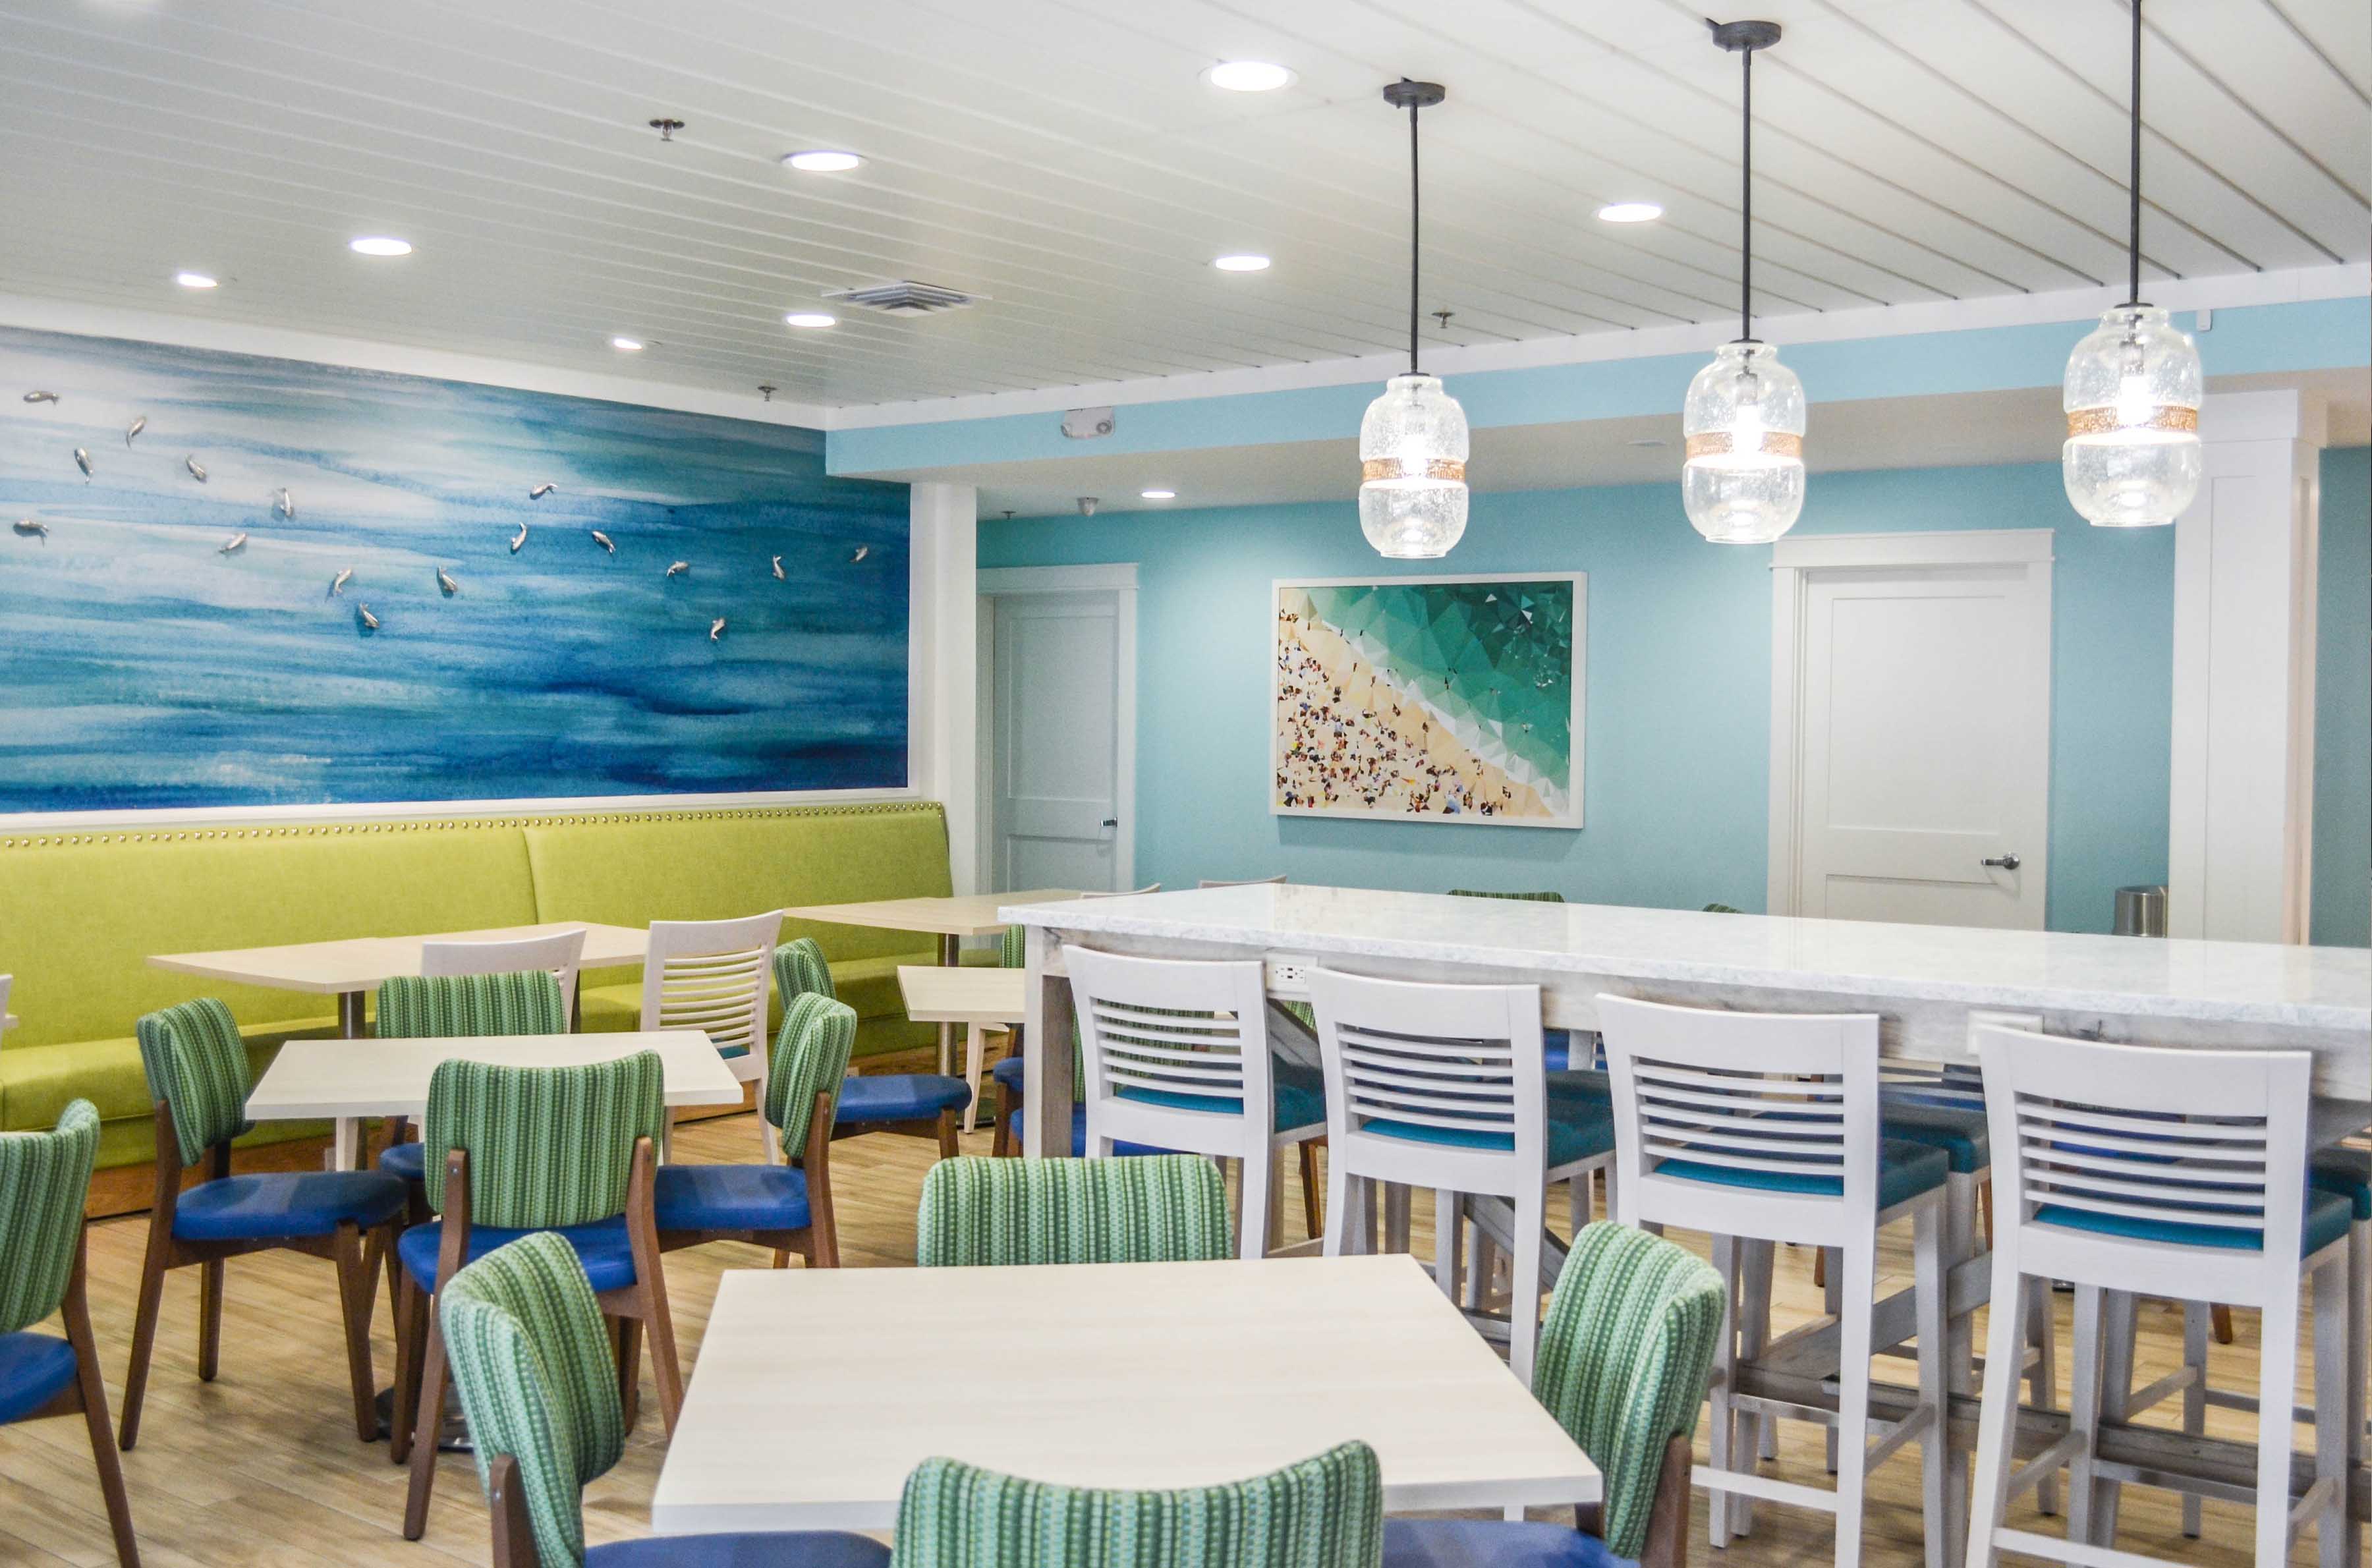 hotel interior design firm j banks design group created this colorful hotel dining area